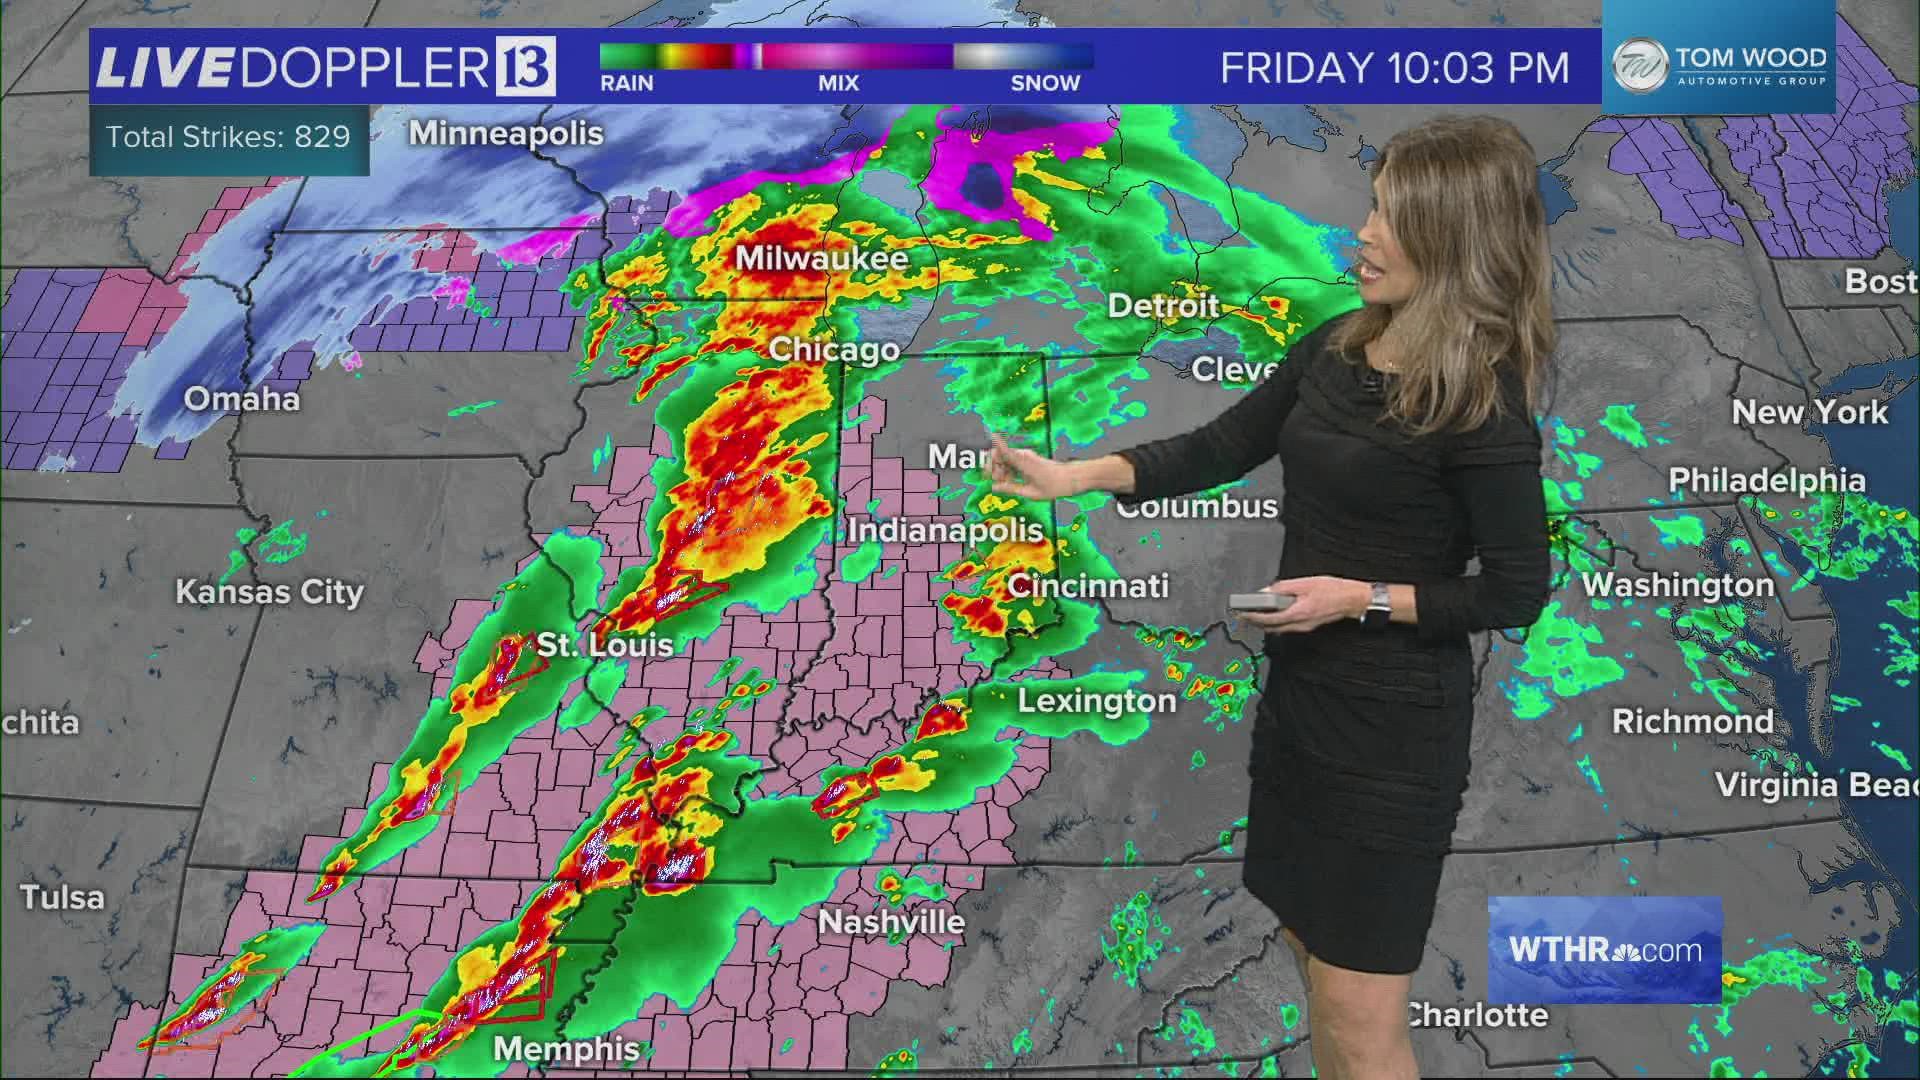 Angela Buchman gave an update on potentially severe weather moving into central Indiana Friday night on the WTHR Facebook page.